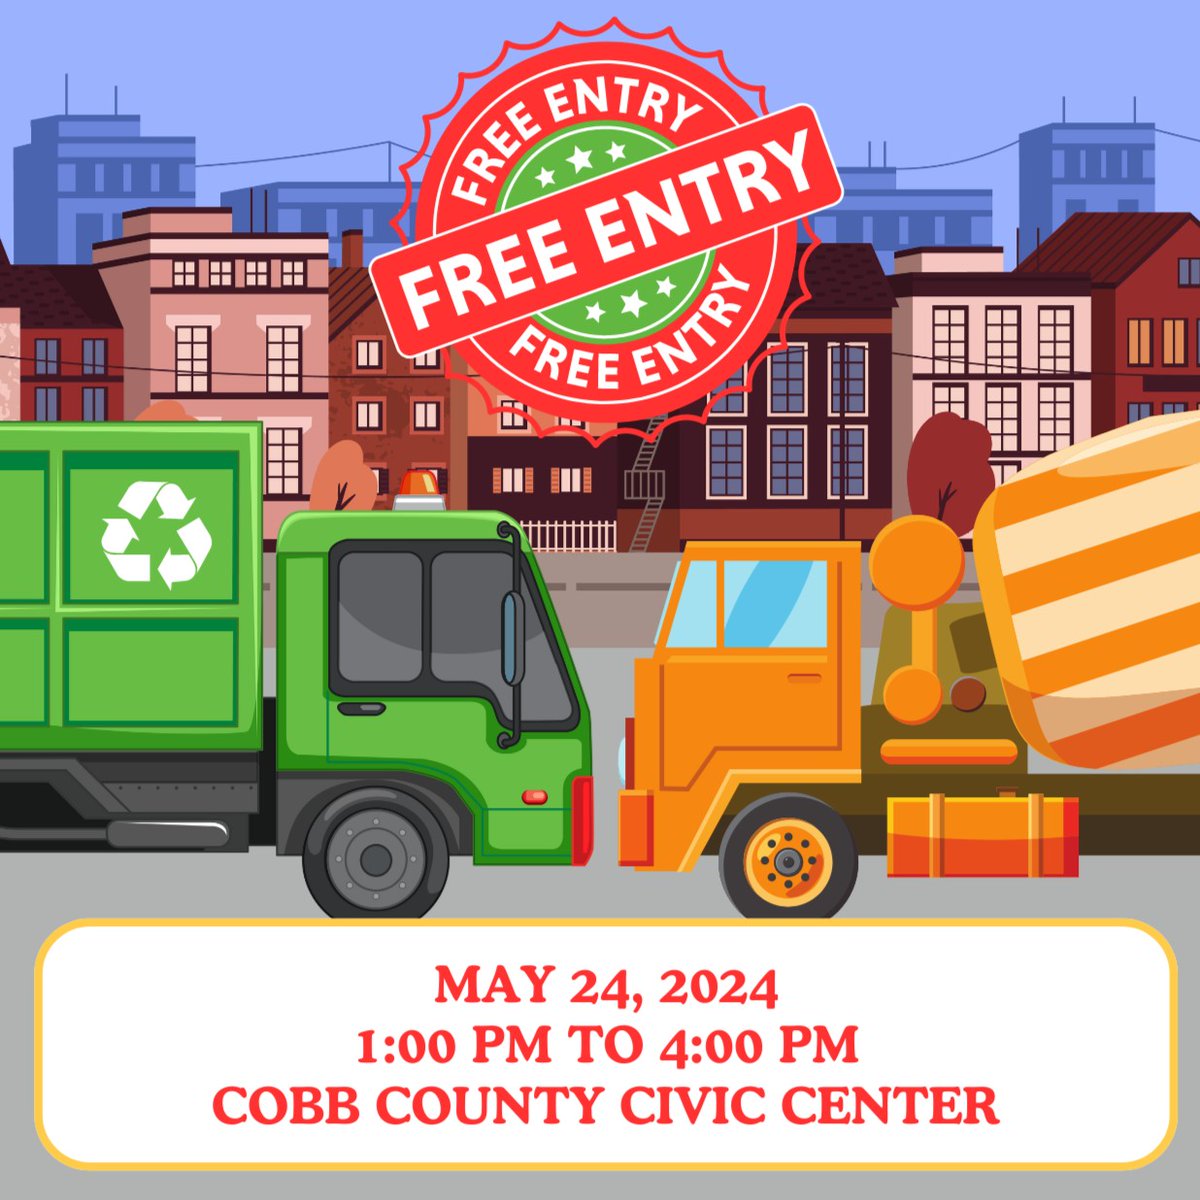 snap that perfect pic when Big trucks and little trucks roll into the Cobb Civic Center parking lot for the Cobb County DOT Touch A Truck event,  1 - 4 p.m. Friday, May 24 @ Cobb Civic Center, 548 South Marietta Pkwy SE, Marietta. 
#cobbcounty #touchatruck #familyfun  #trucks